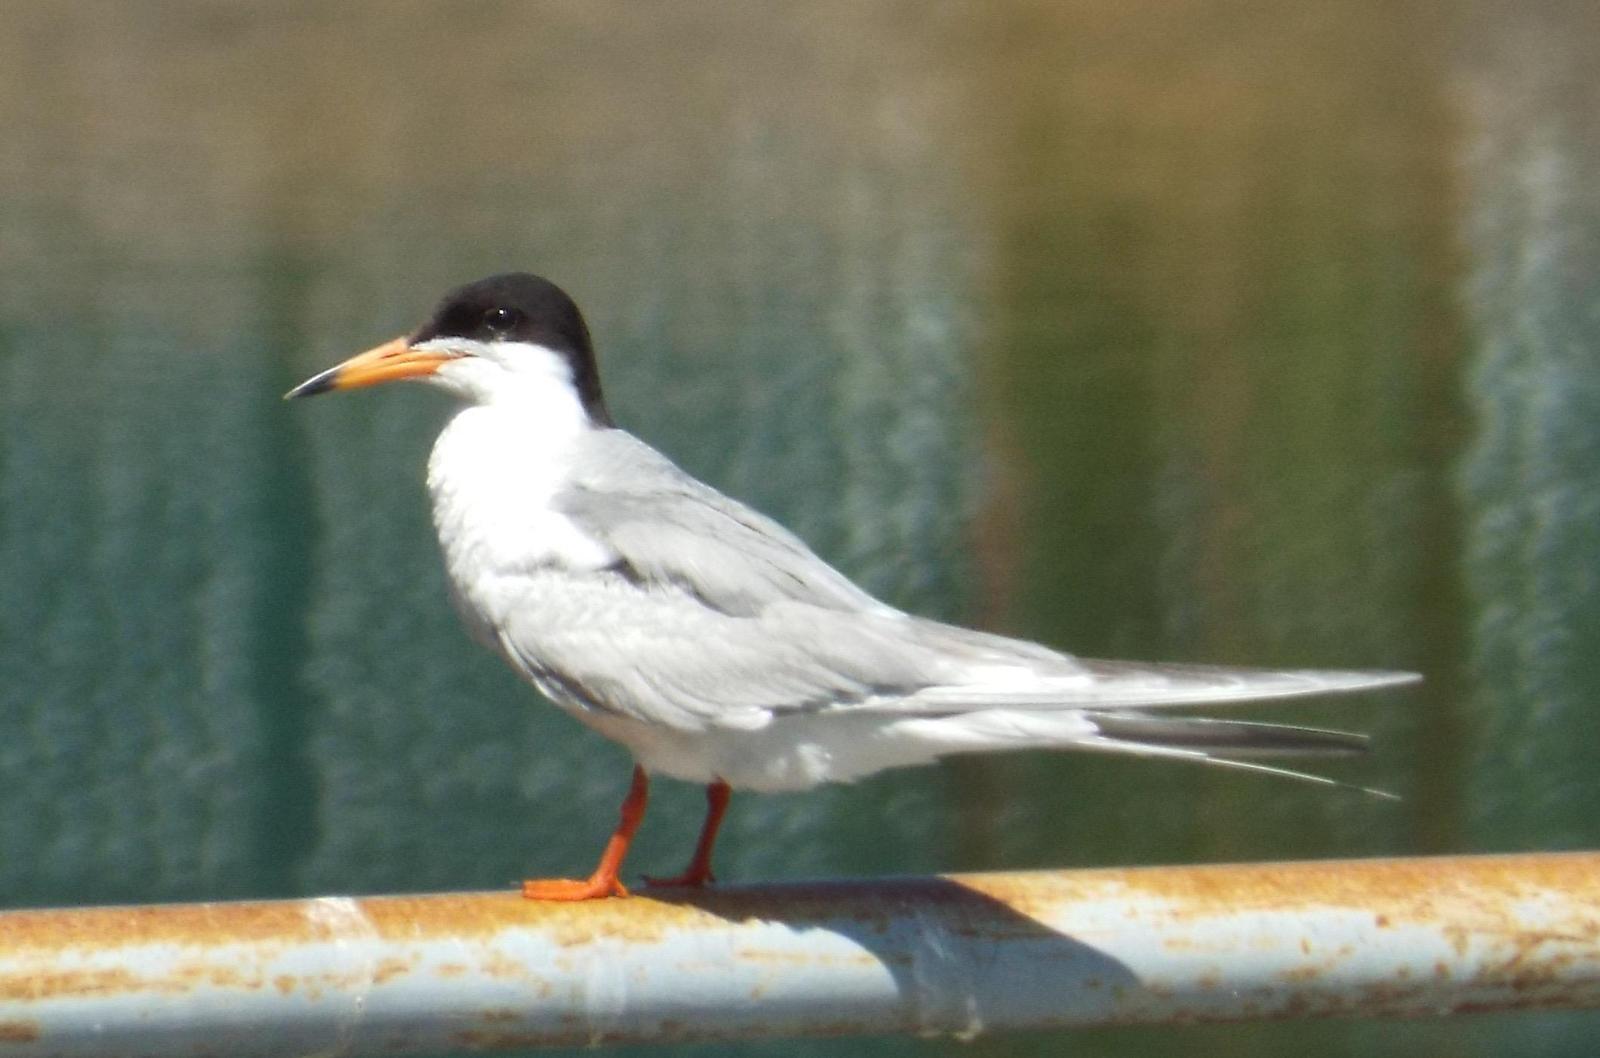 Common/Forster's Tern Photo by charlie daniels